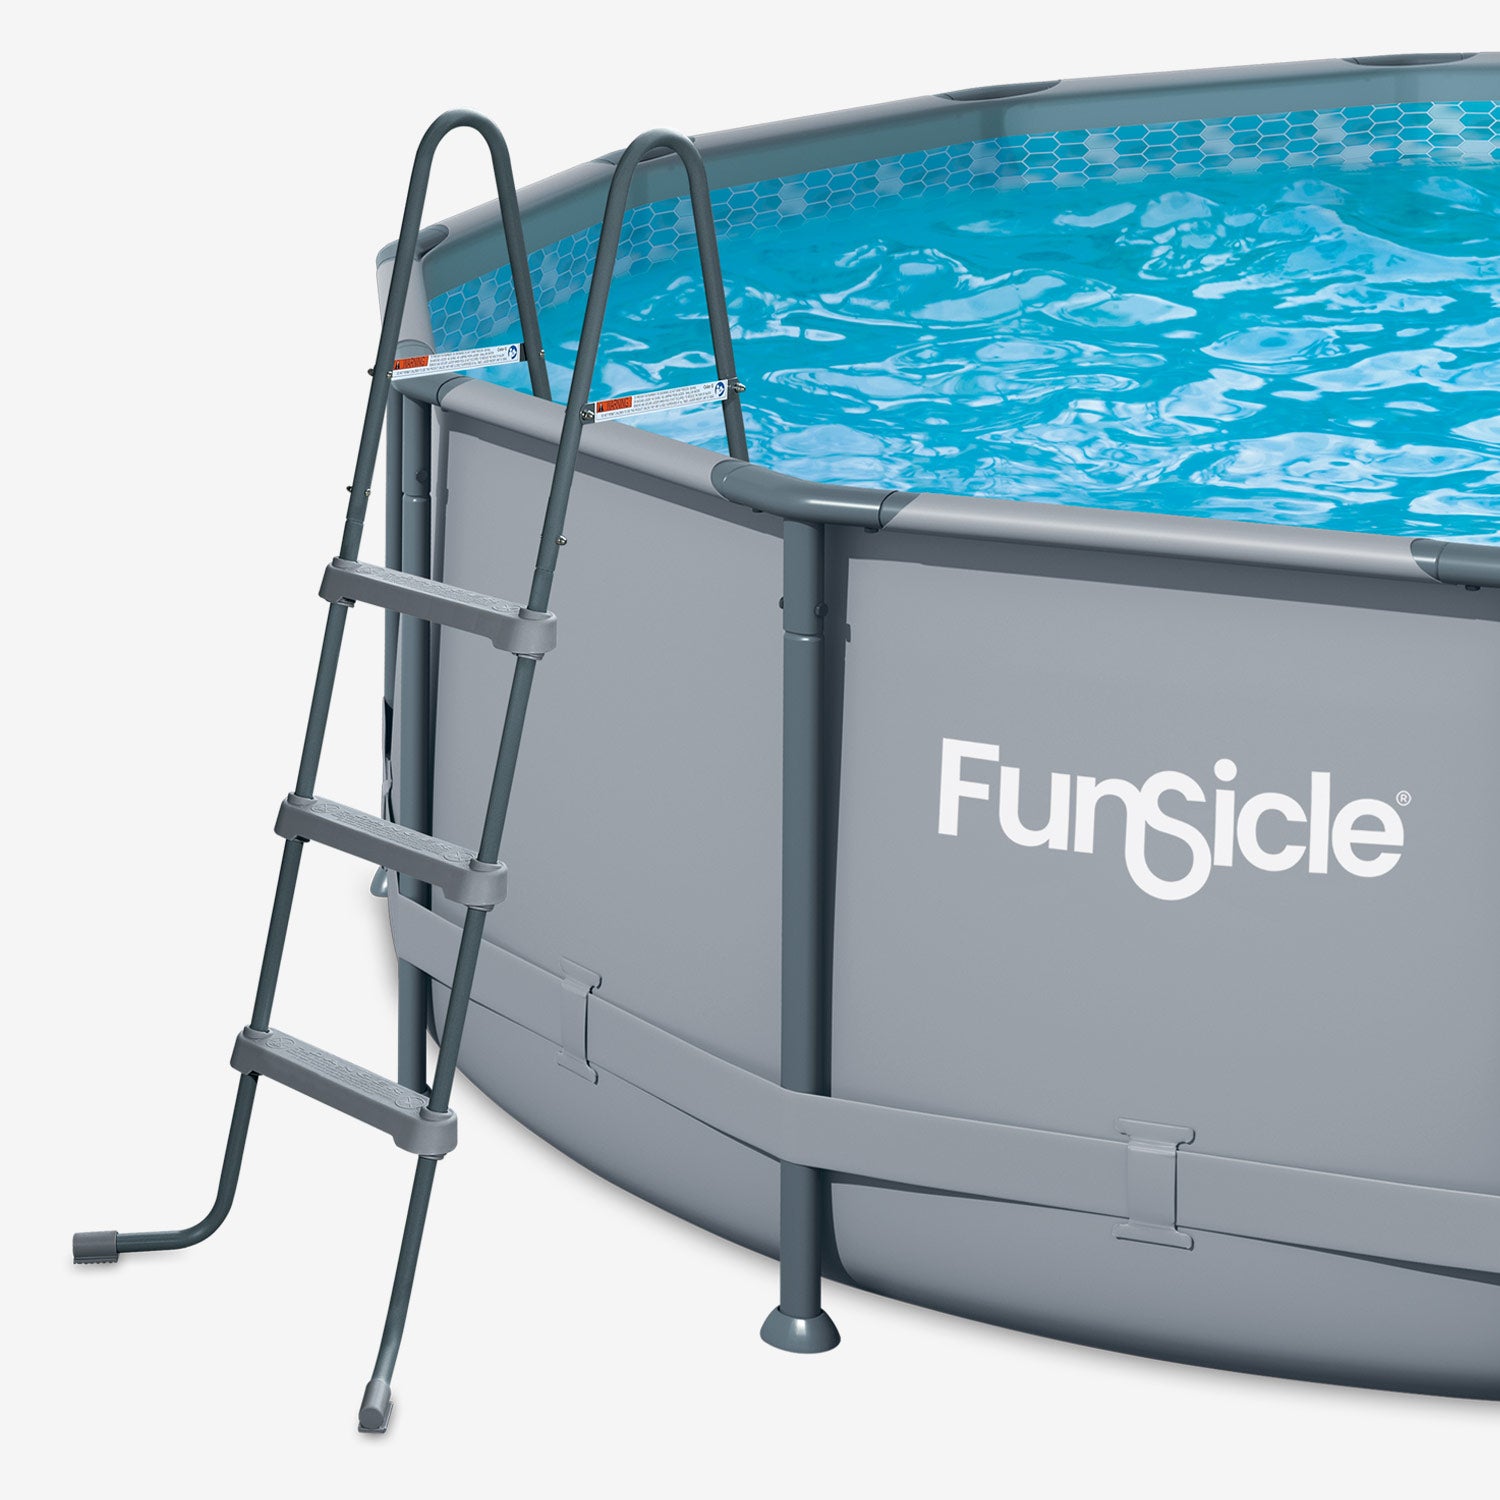 Funsicle 42" SureStep Ladder with a gray pool